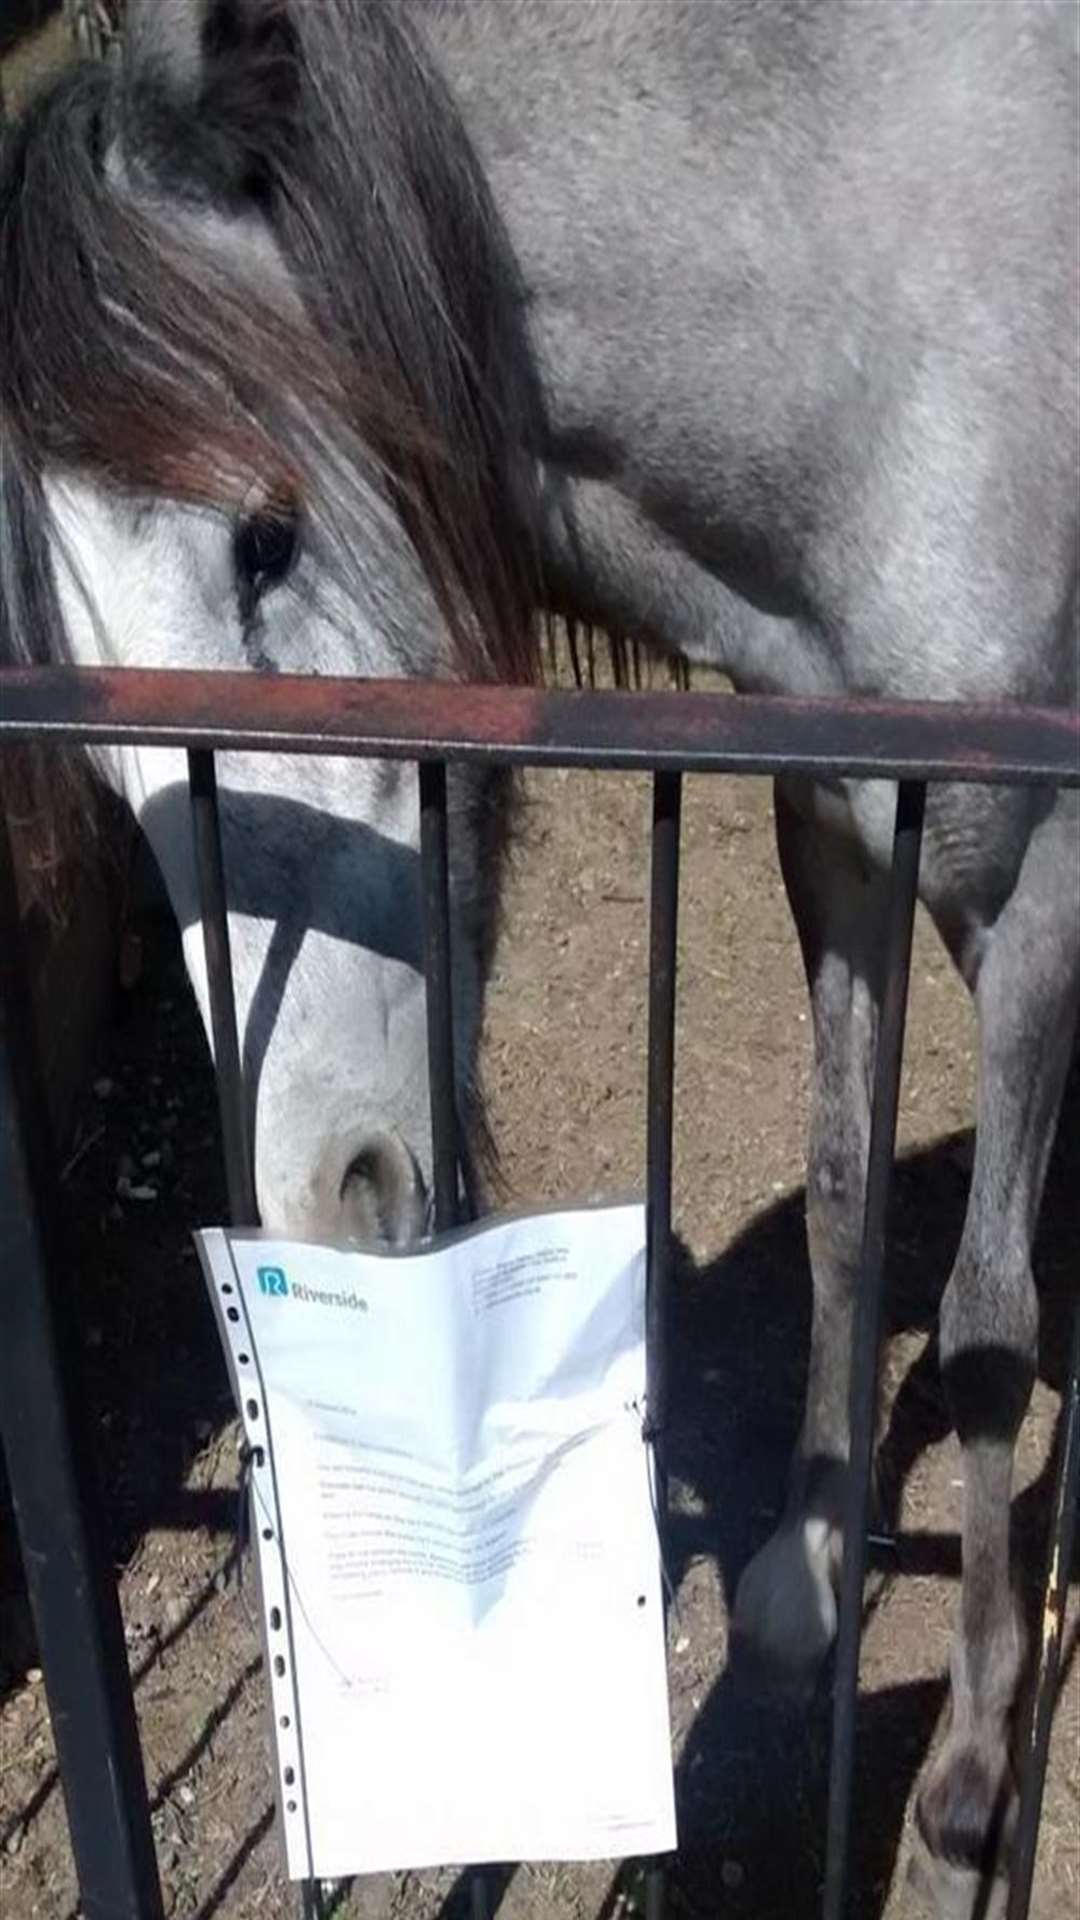 The horse has been served an eviction notice. Picture: @Kent_999s